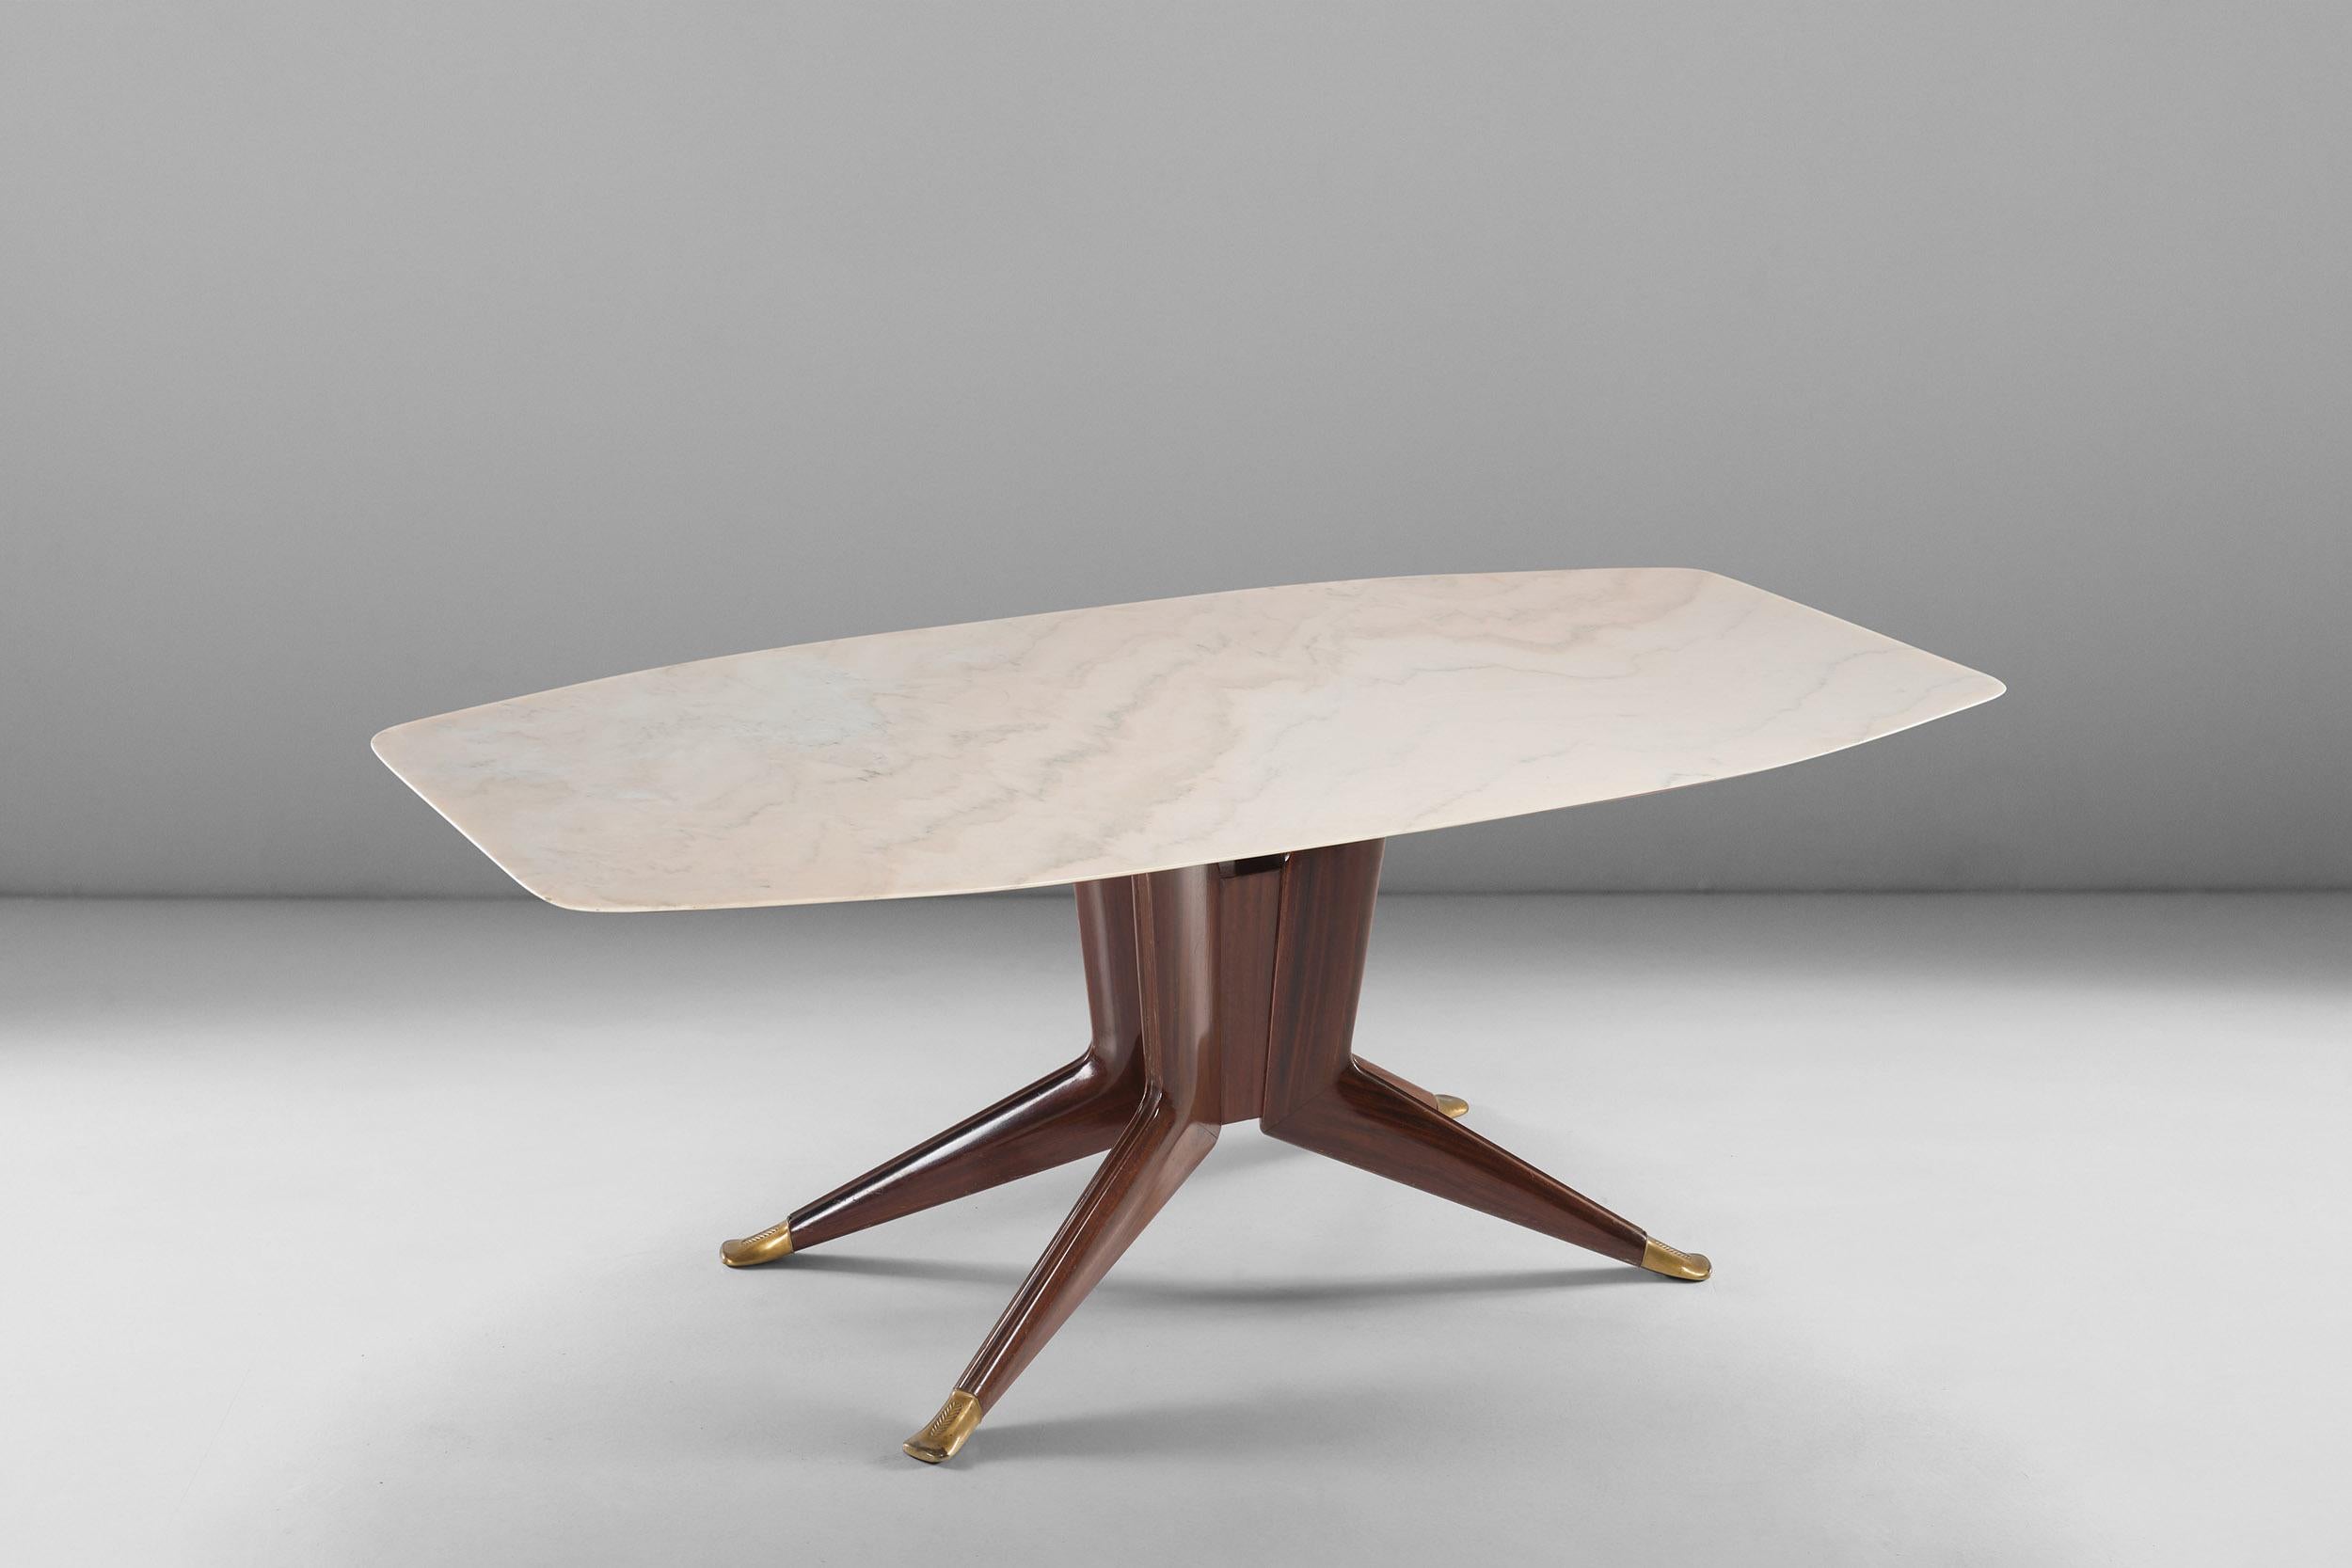 Italian Dassi Big Wooden Dining Table with Marble Top and Brass Feet, 1950 circa